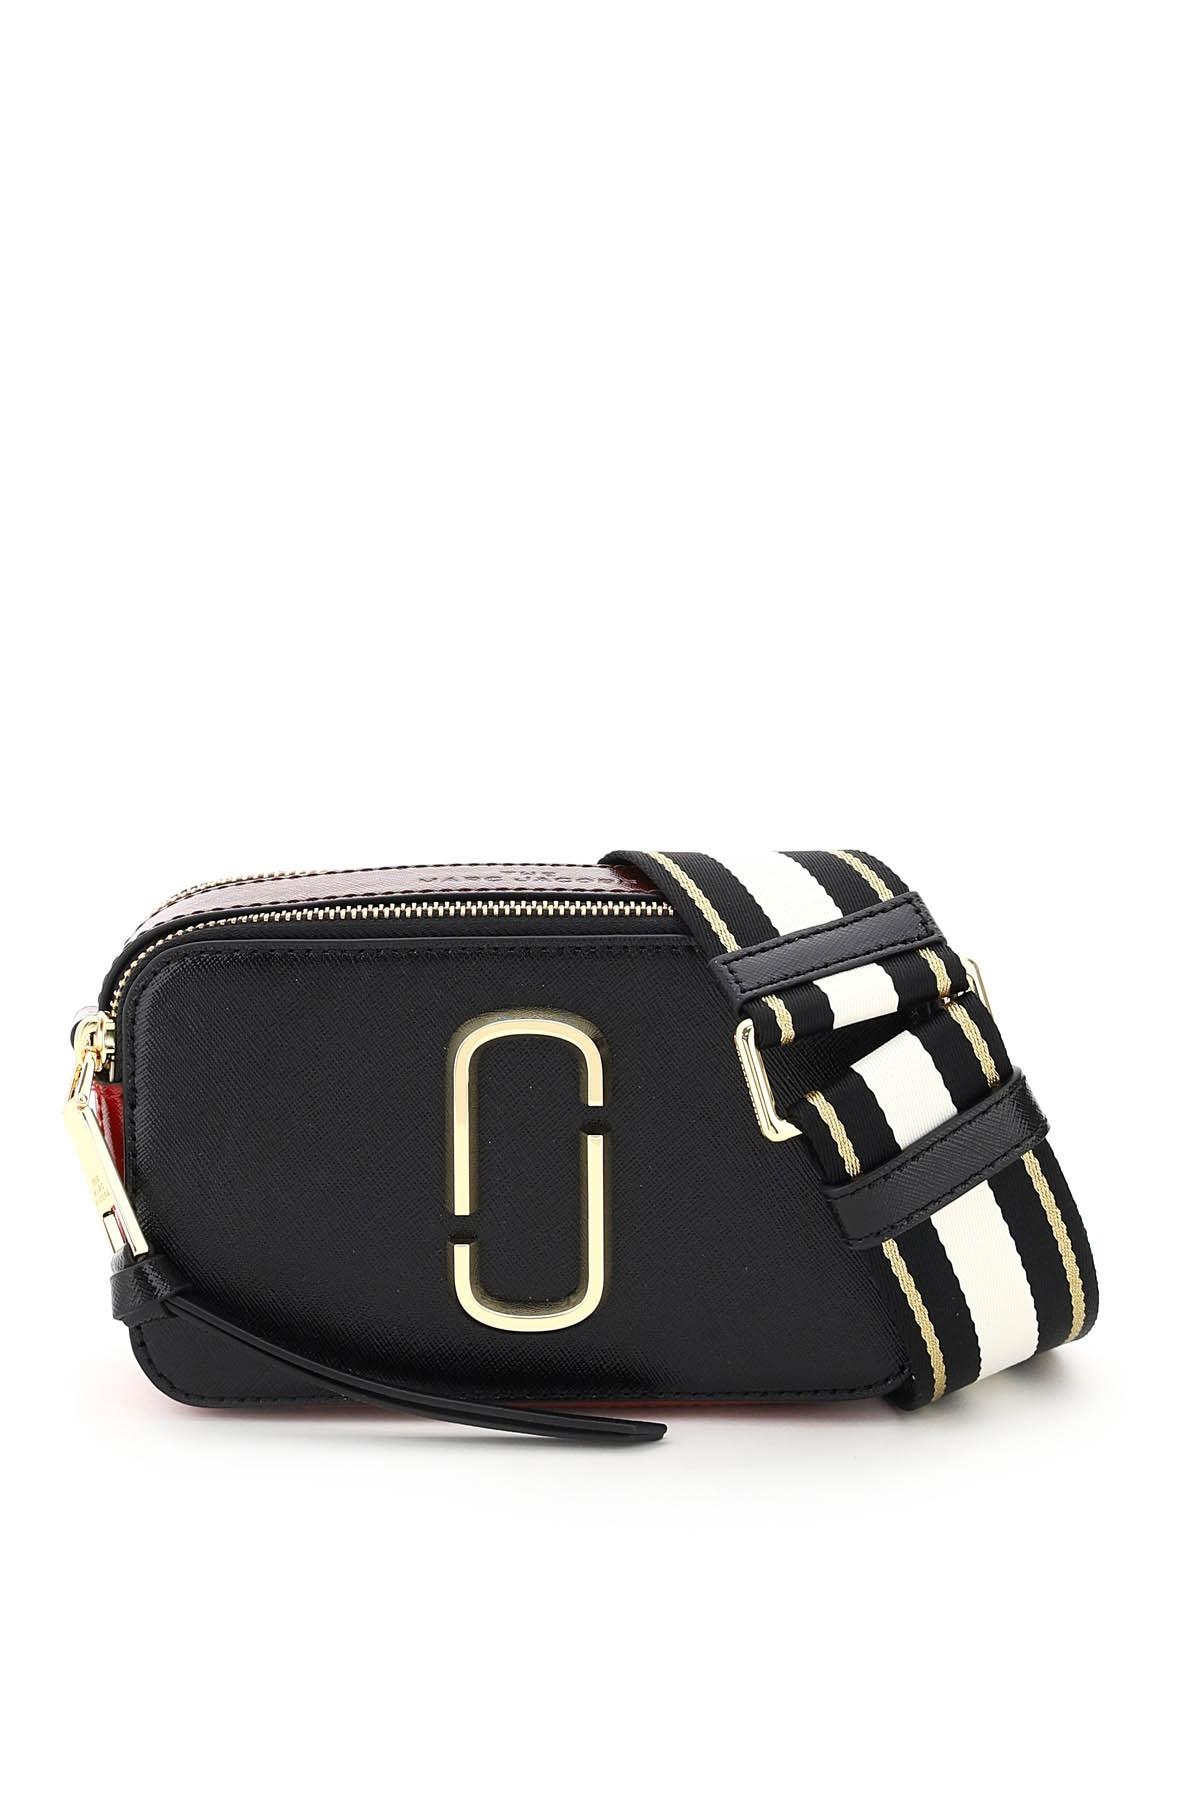 Marc Jacobs The Snapshot Small Camera Bag in Black